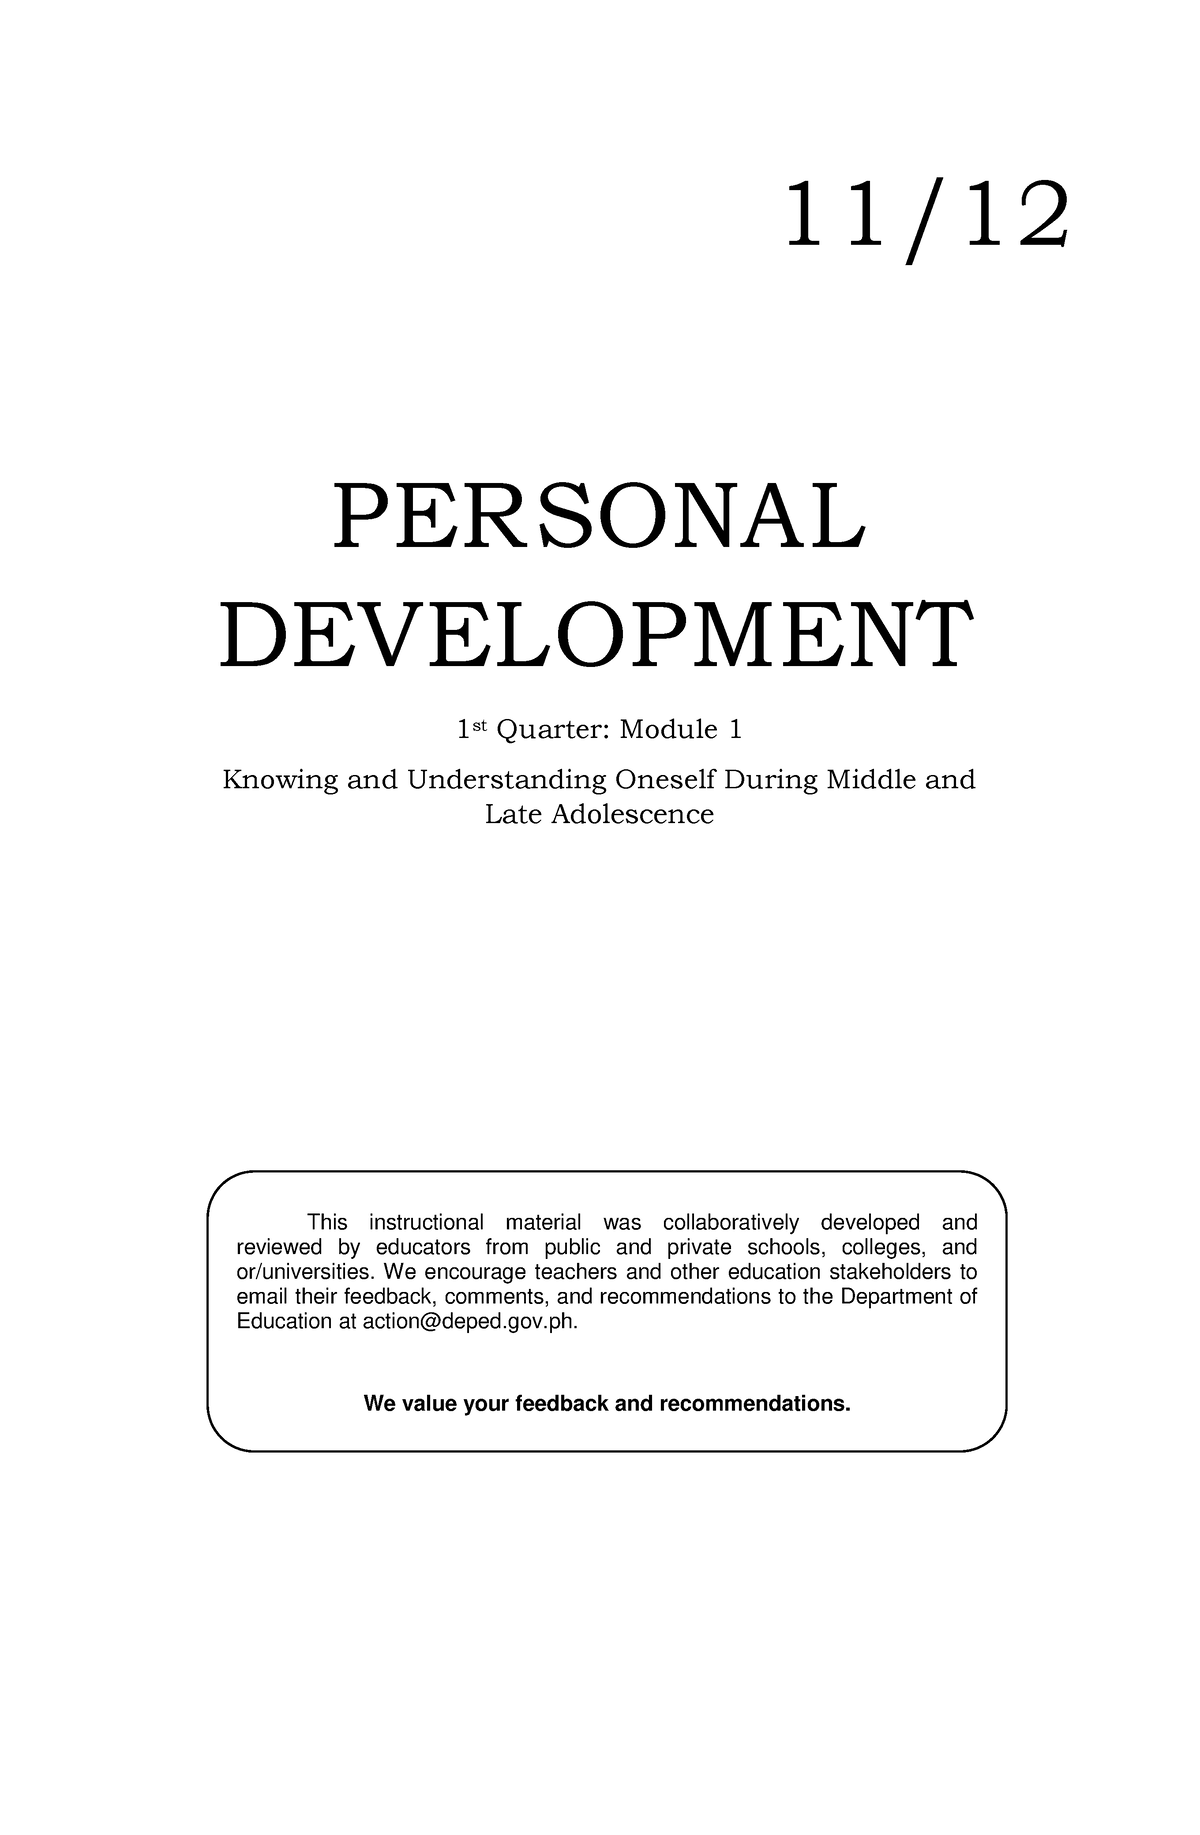 Personal Development Week 1 - This instructional material was ...